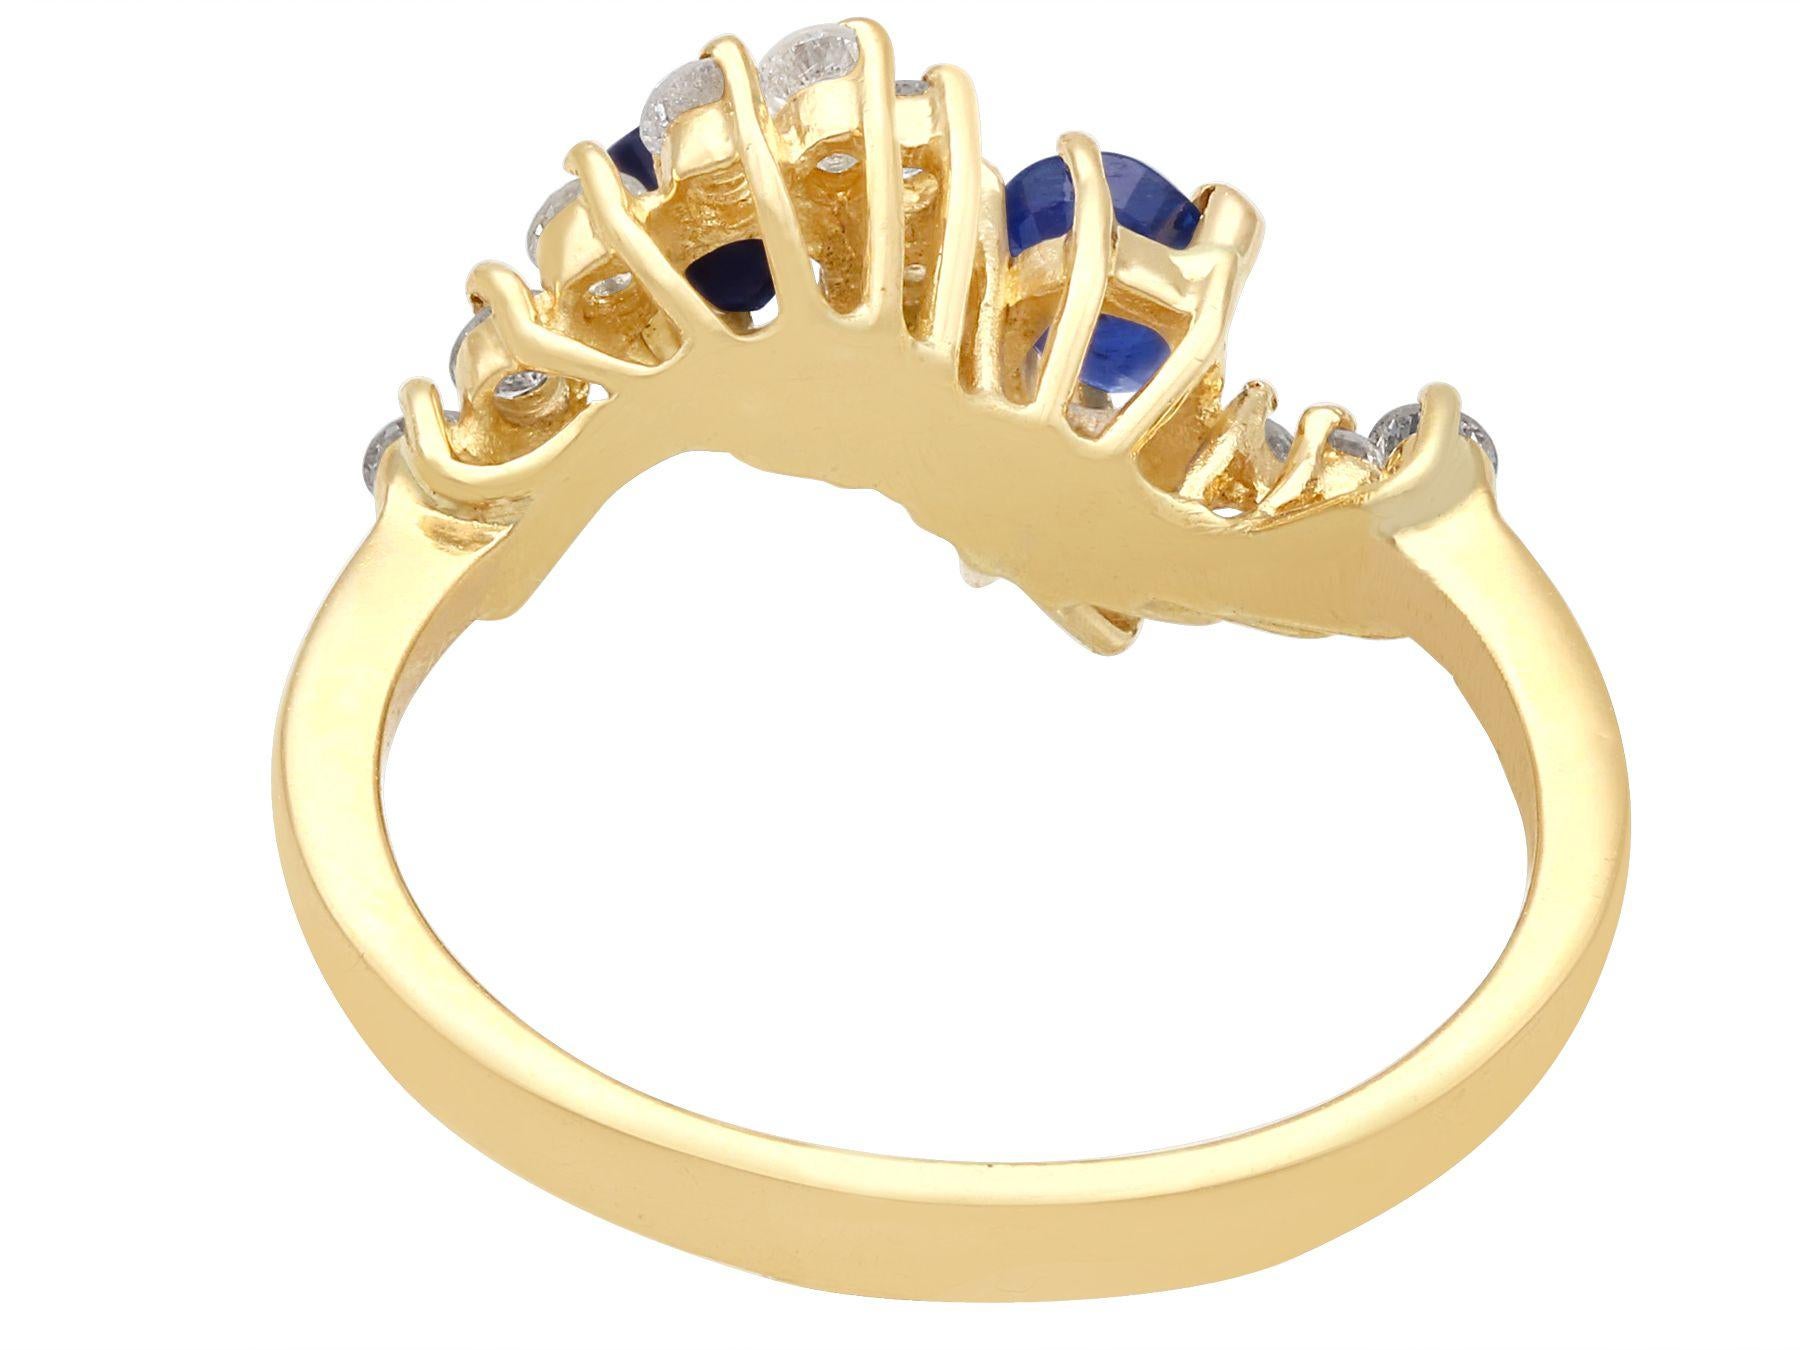 Vintage 1990s Sapphire and Diamond 18K Gold Twist Ring In Excellent Condition For Sale In Jesmond, Newcastle Upon Tyne